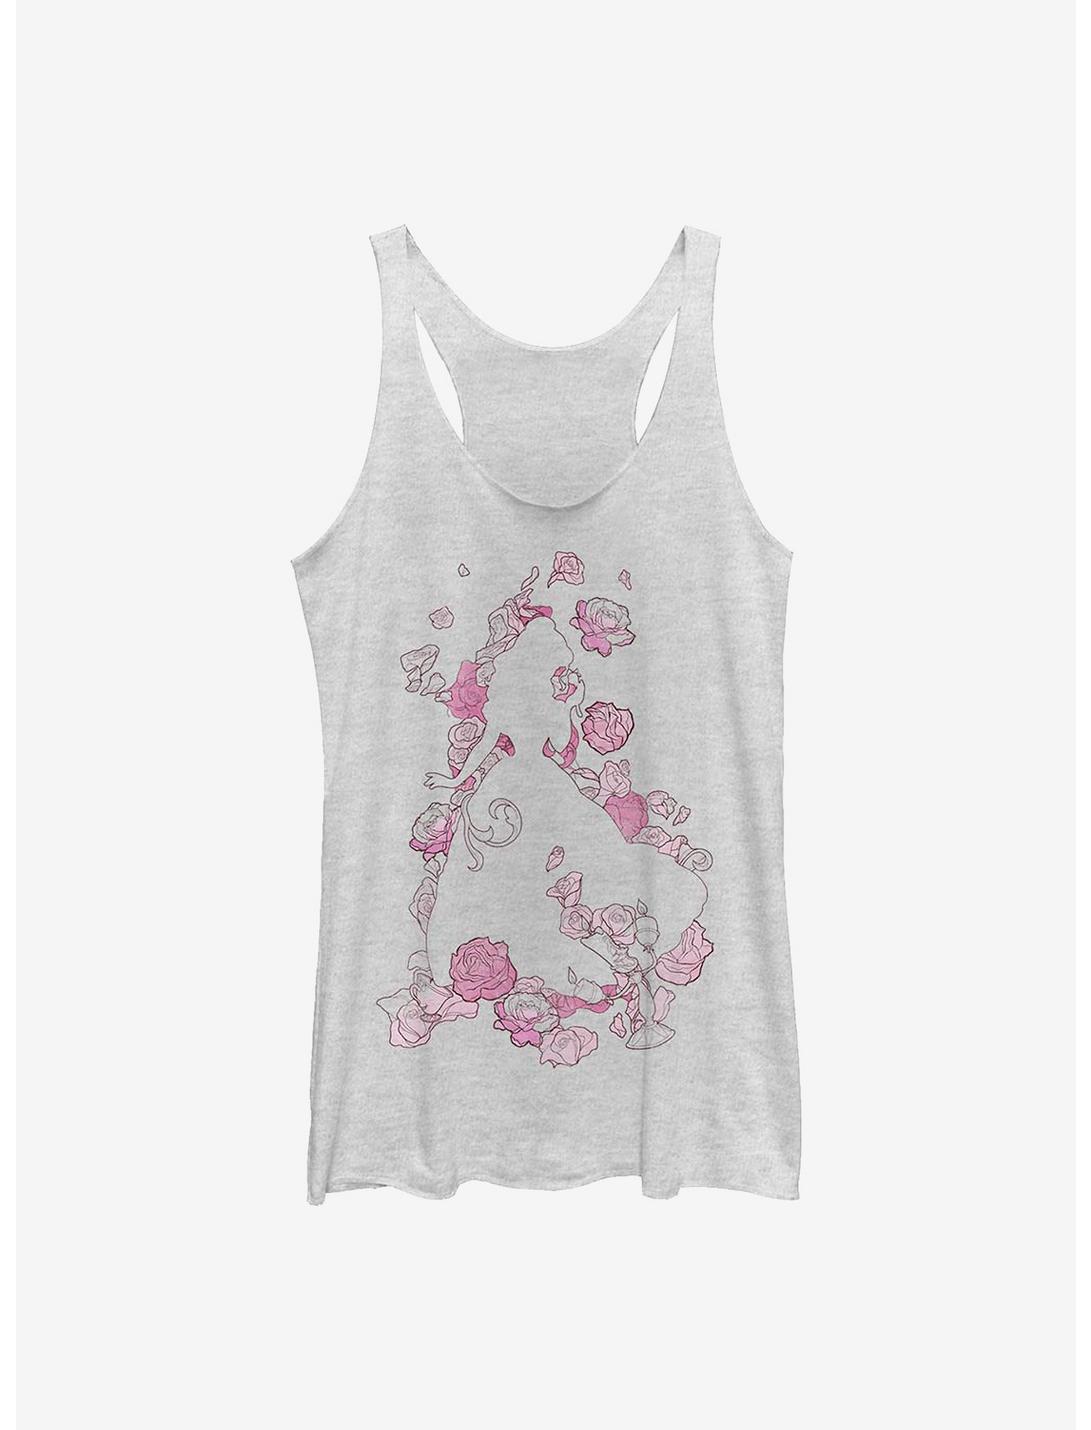 Disney Beauty And The Beast Beauty Silhouette Womens Tank Top, WHITE HTR, hi-res